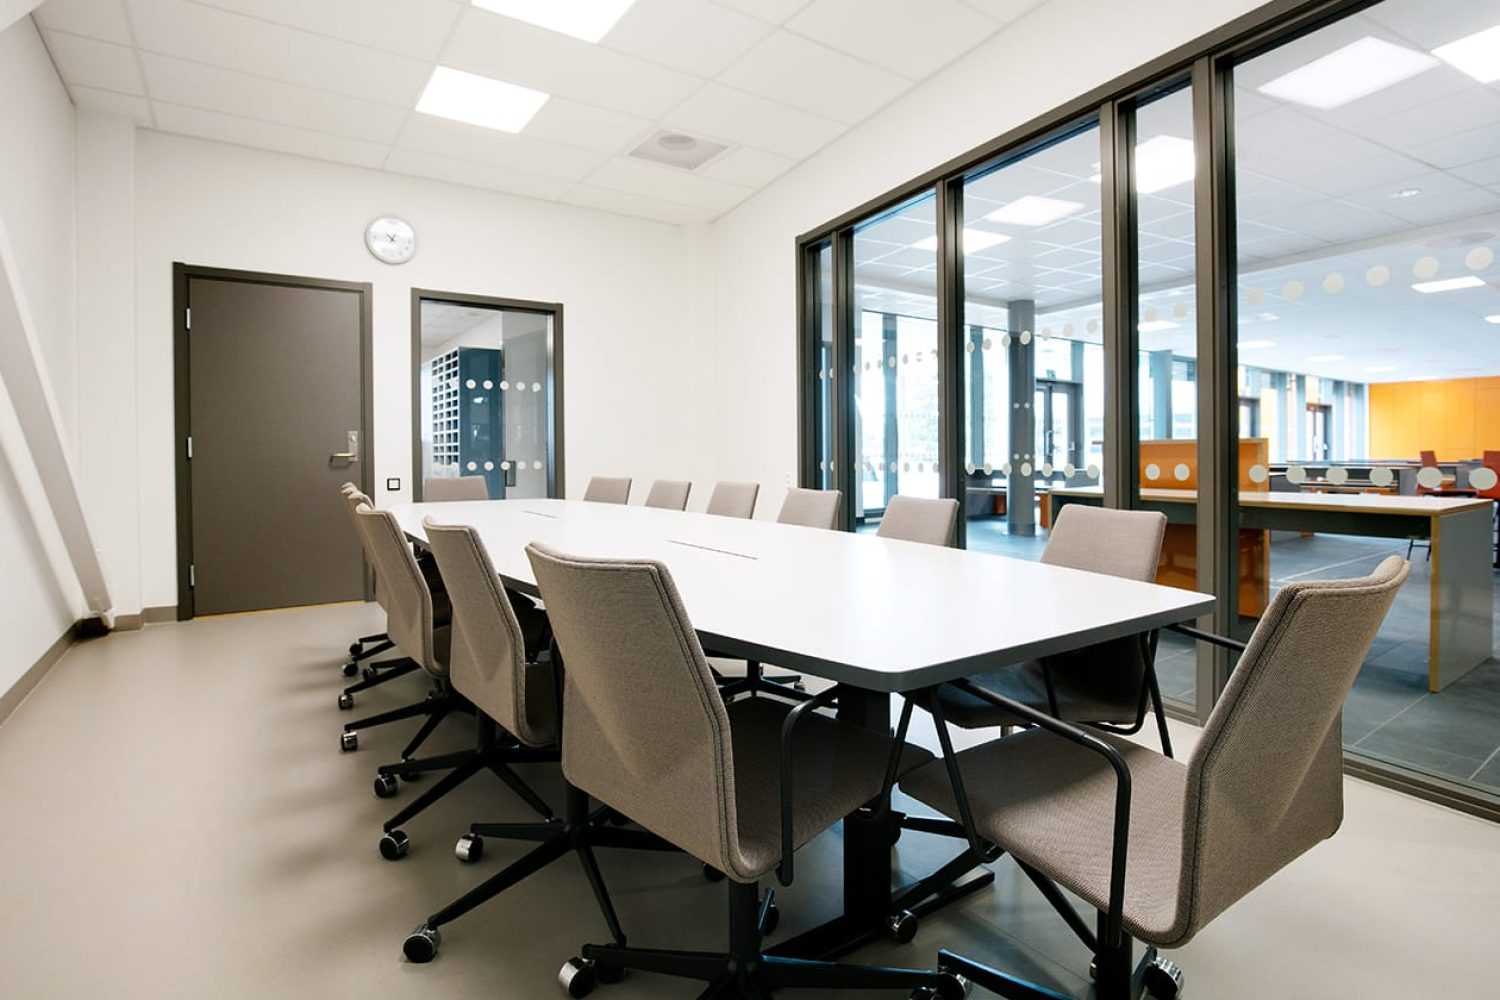 A conference room with a large conference table and office desk chairs.